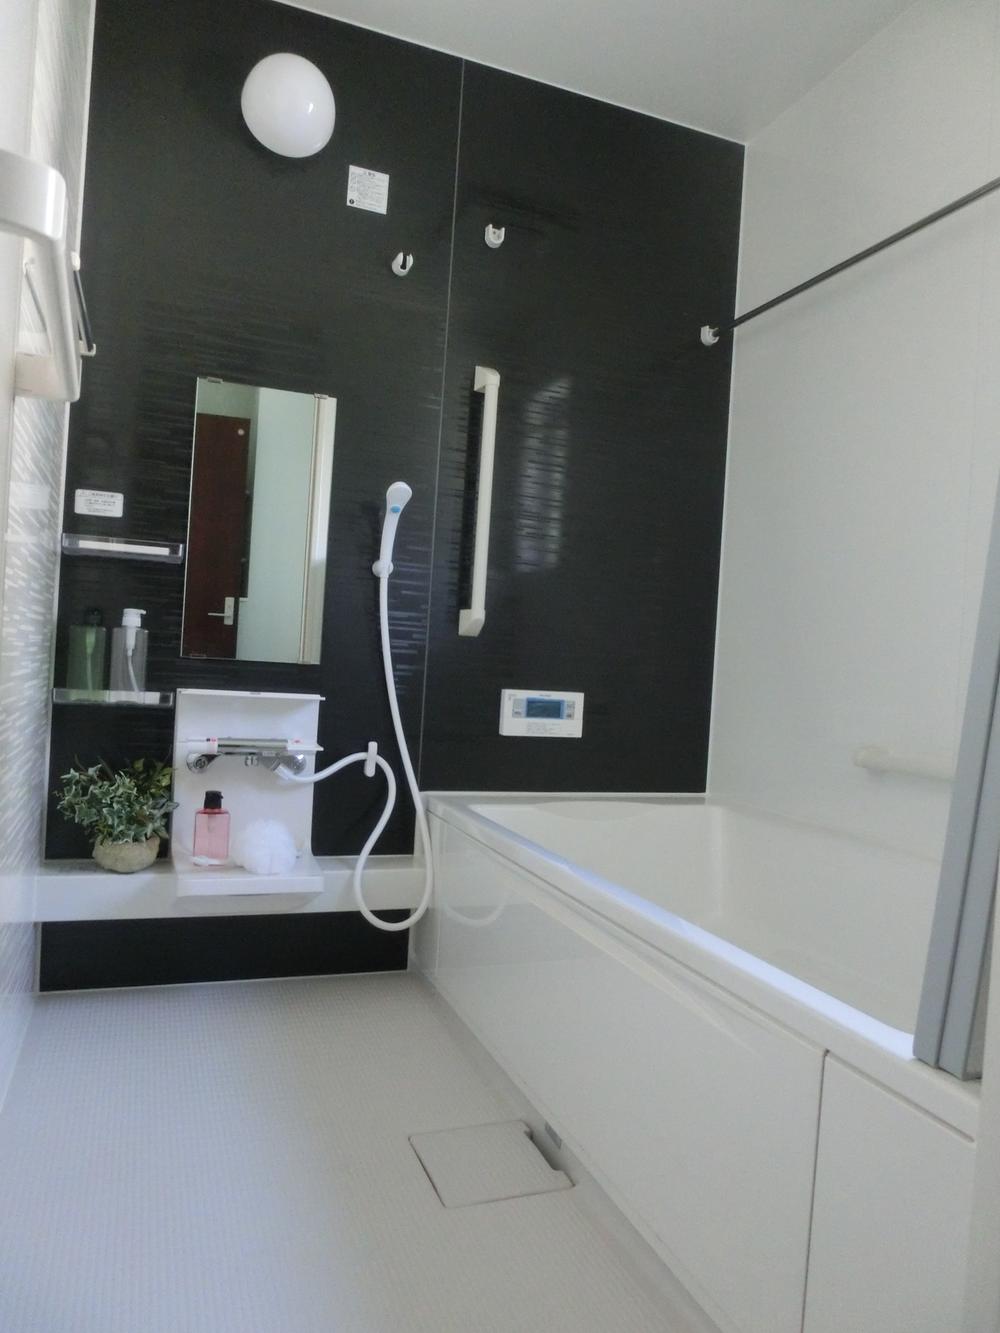 Bathroom. With bathroom heating drying function, It is spacious likely put off the foot (11 May 2013) Shooting